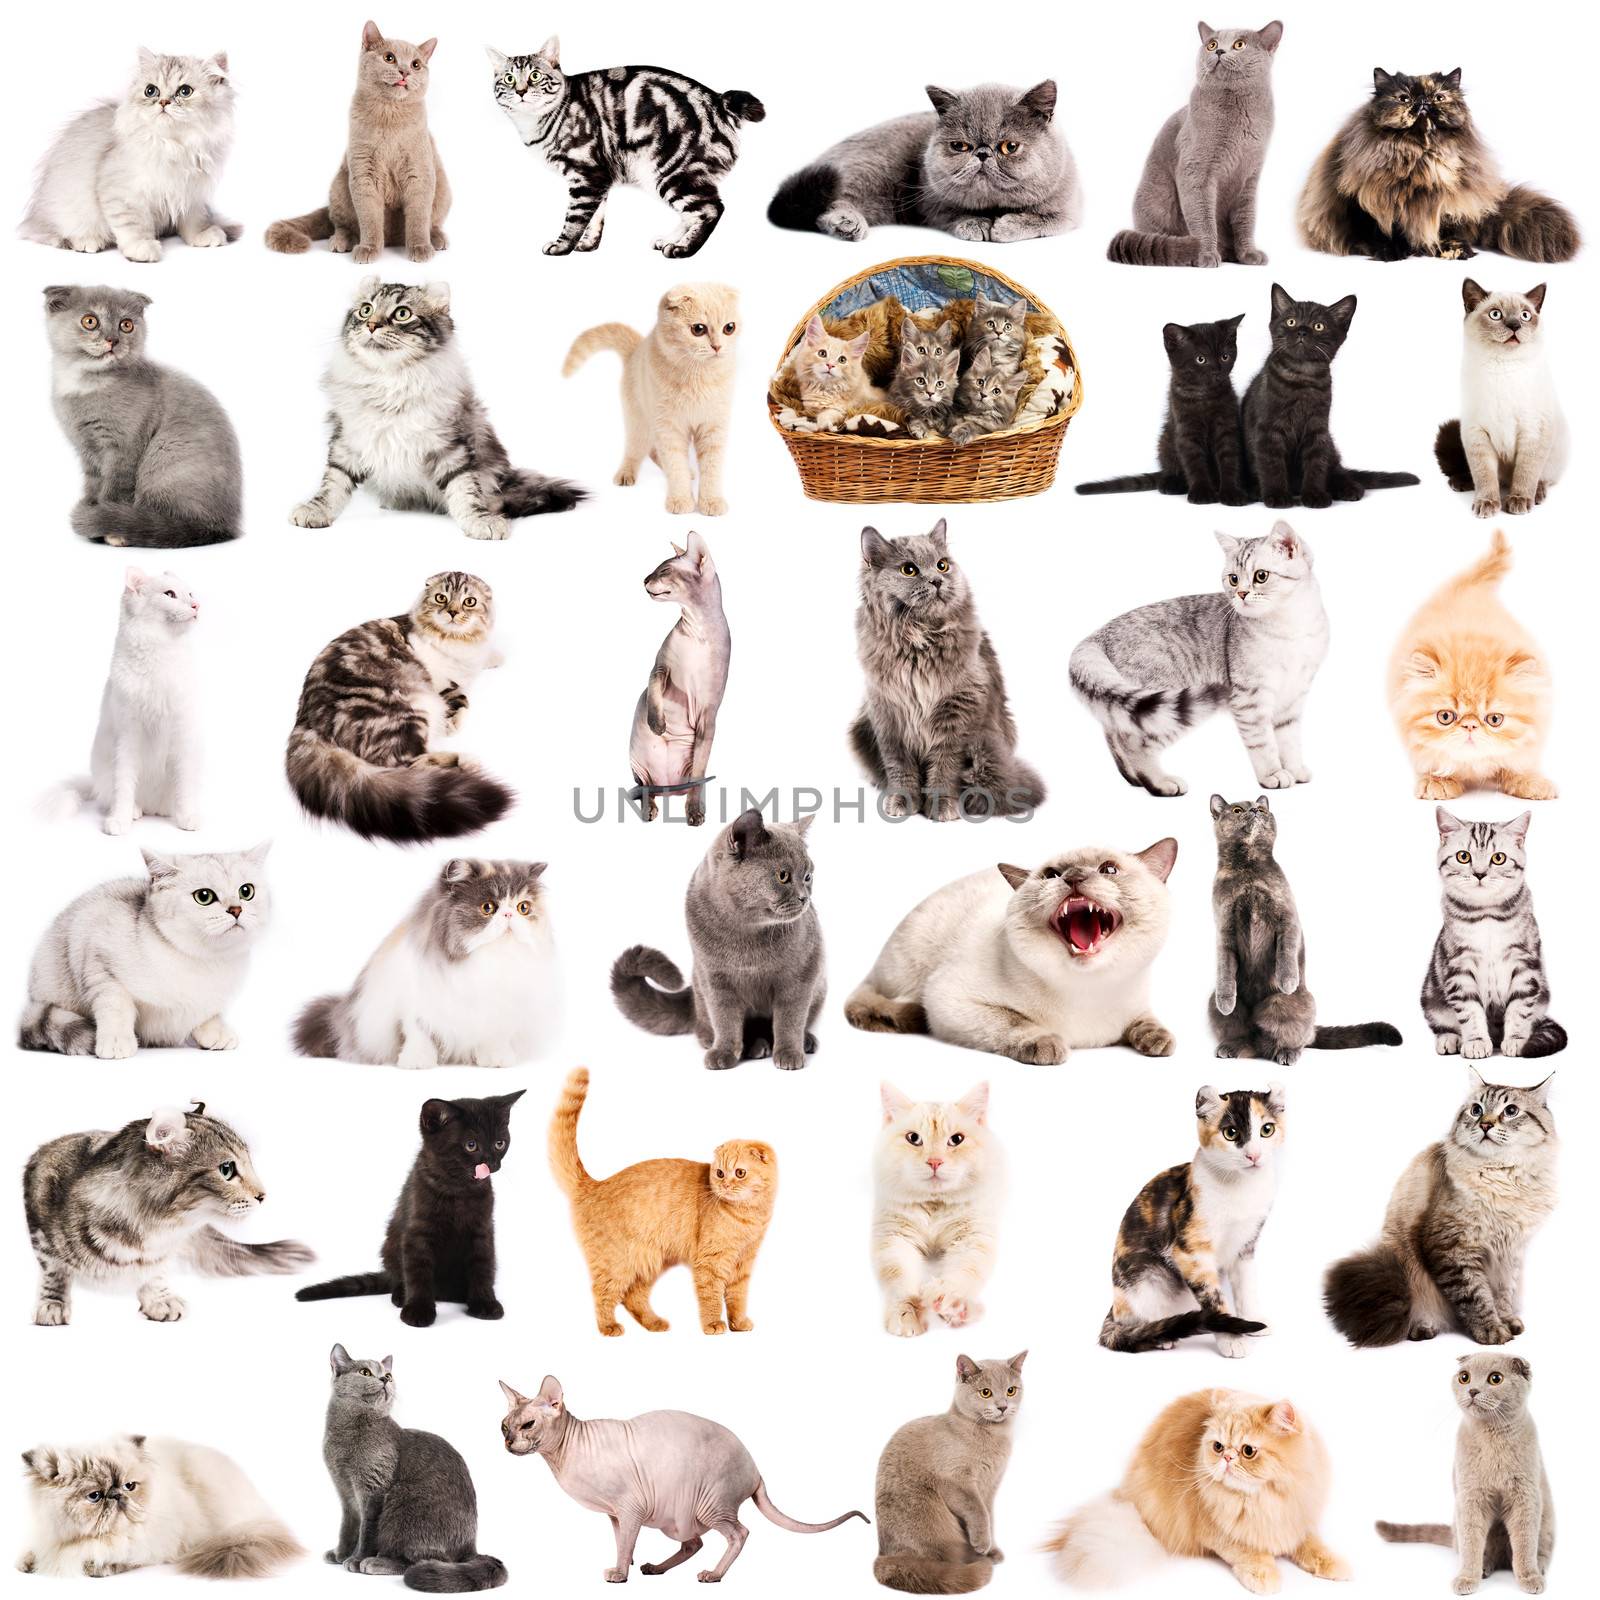 Group of 36 cats breeds in front of a white background 